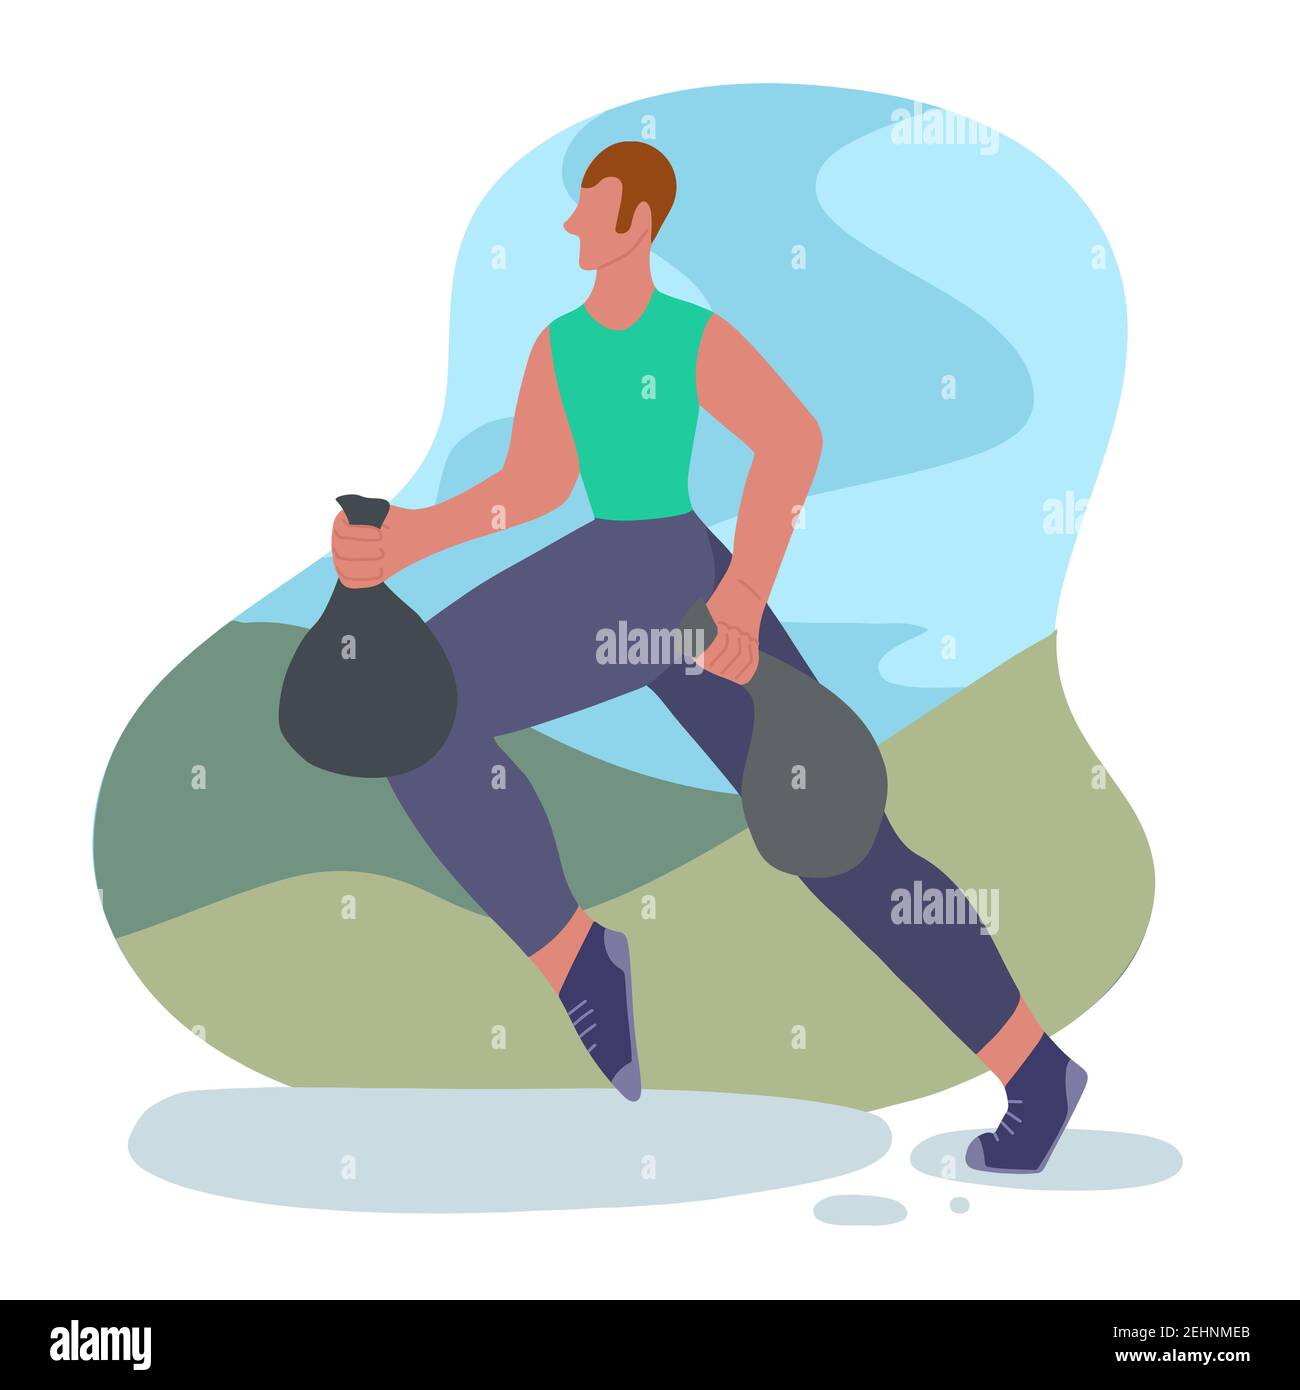 Plogging. Environmental movement. Healthy lifestyle. Man jogging with a garbage bag in park. Physical activity and care for the environment. Maintaini Stock Vector